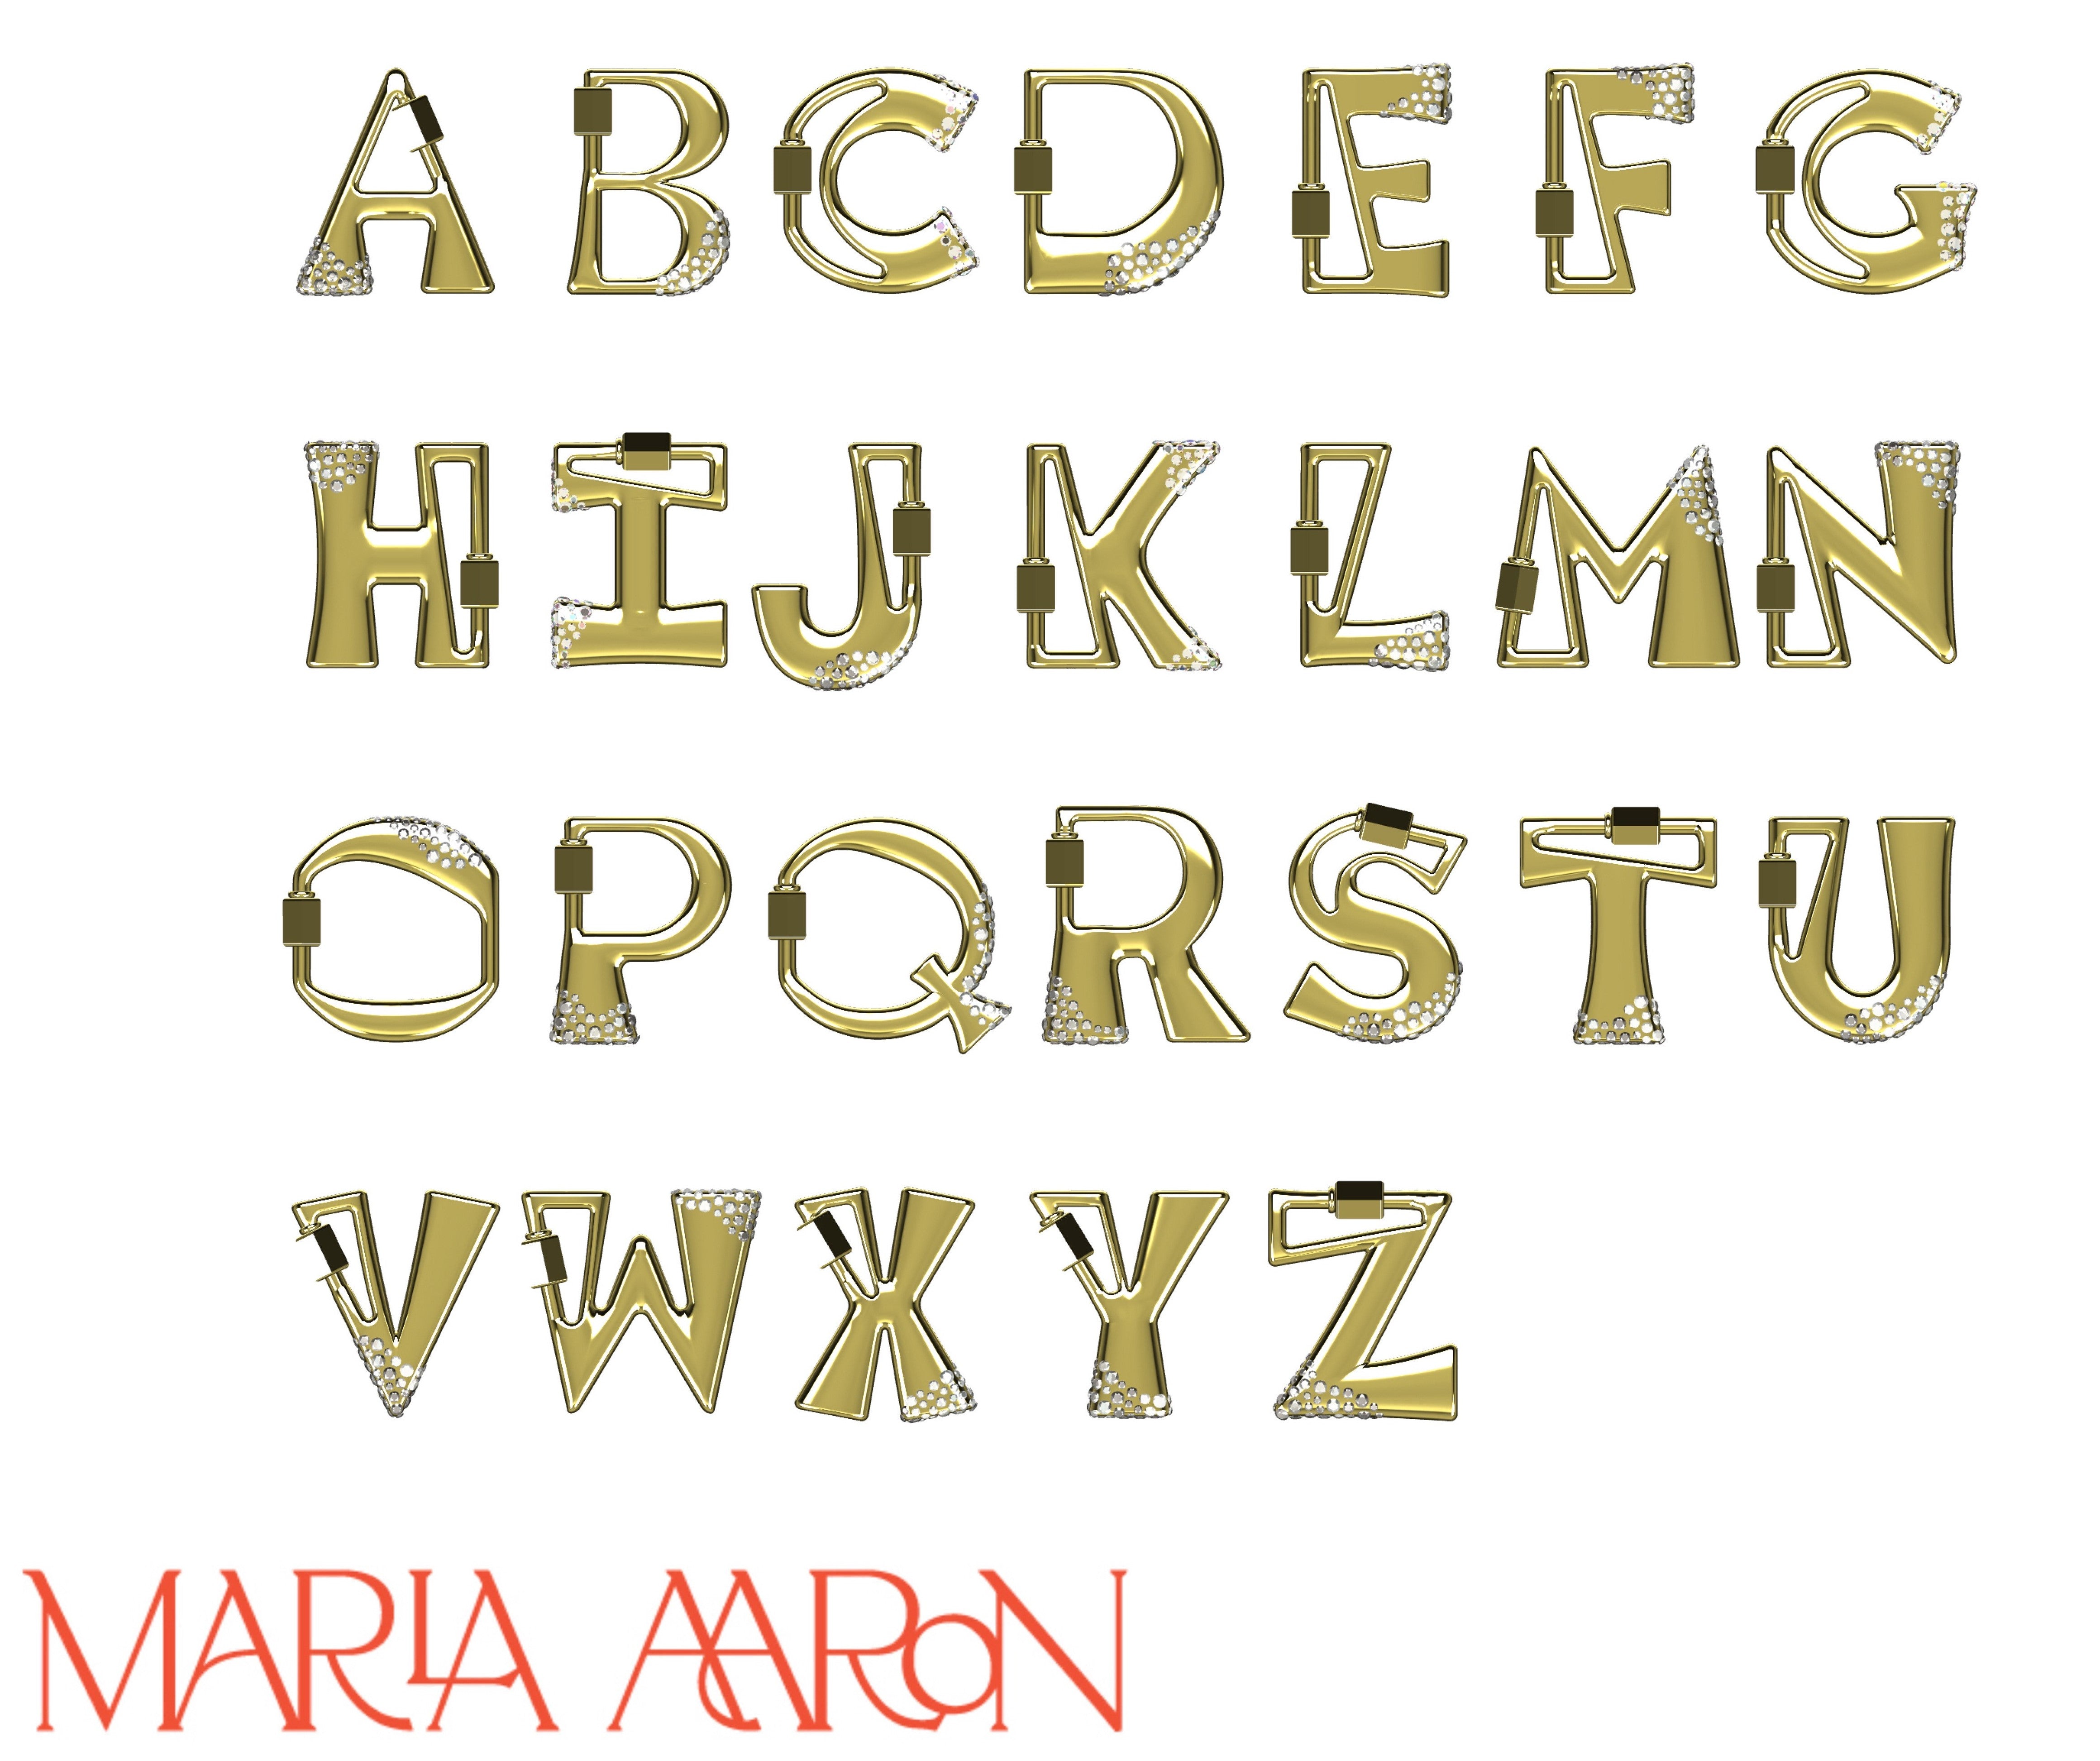 Gold locks of every letter of the alphabet including T charm against white backdrop with Marla Aaron logo in bottom left corner